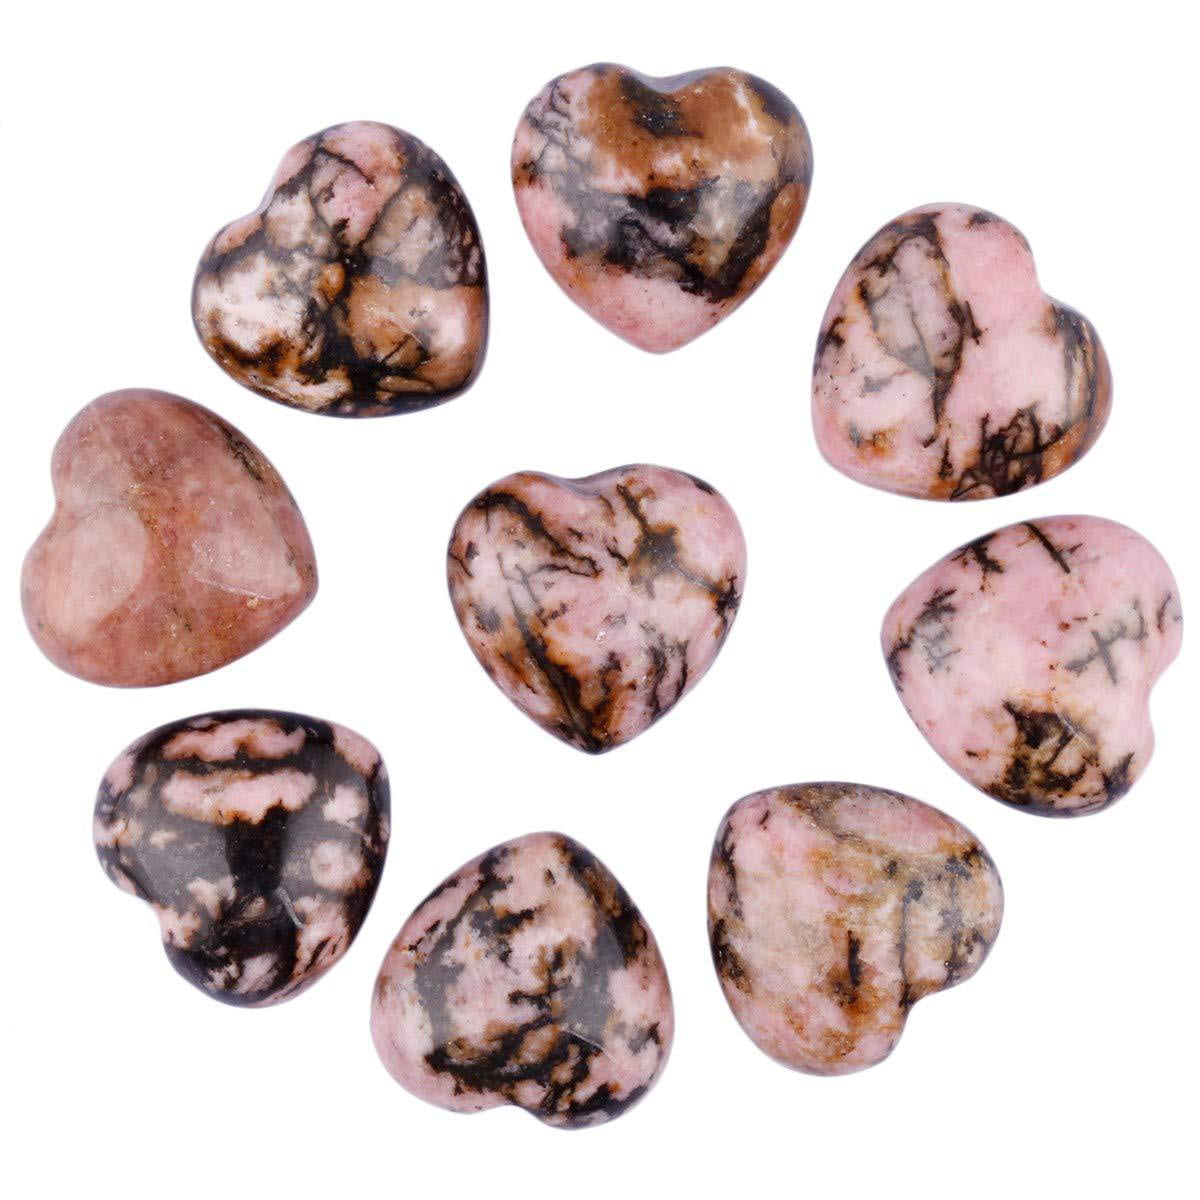 Healing Palm Details about   SUNYIK Assorted Crystal Stone Carved Puff Heart Pocket Stone Set